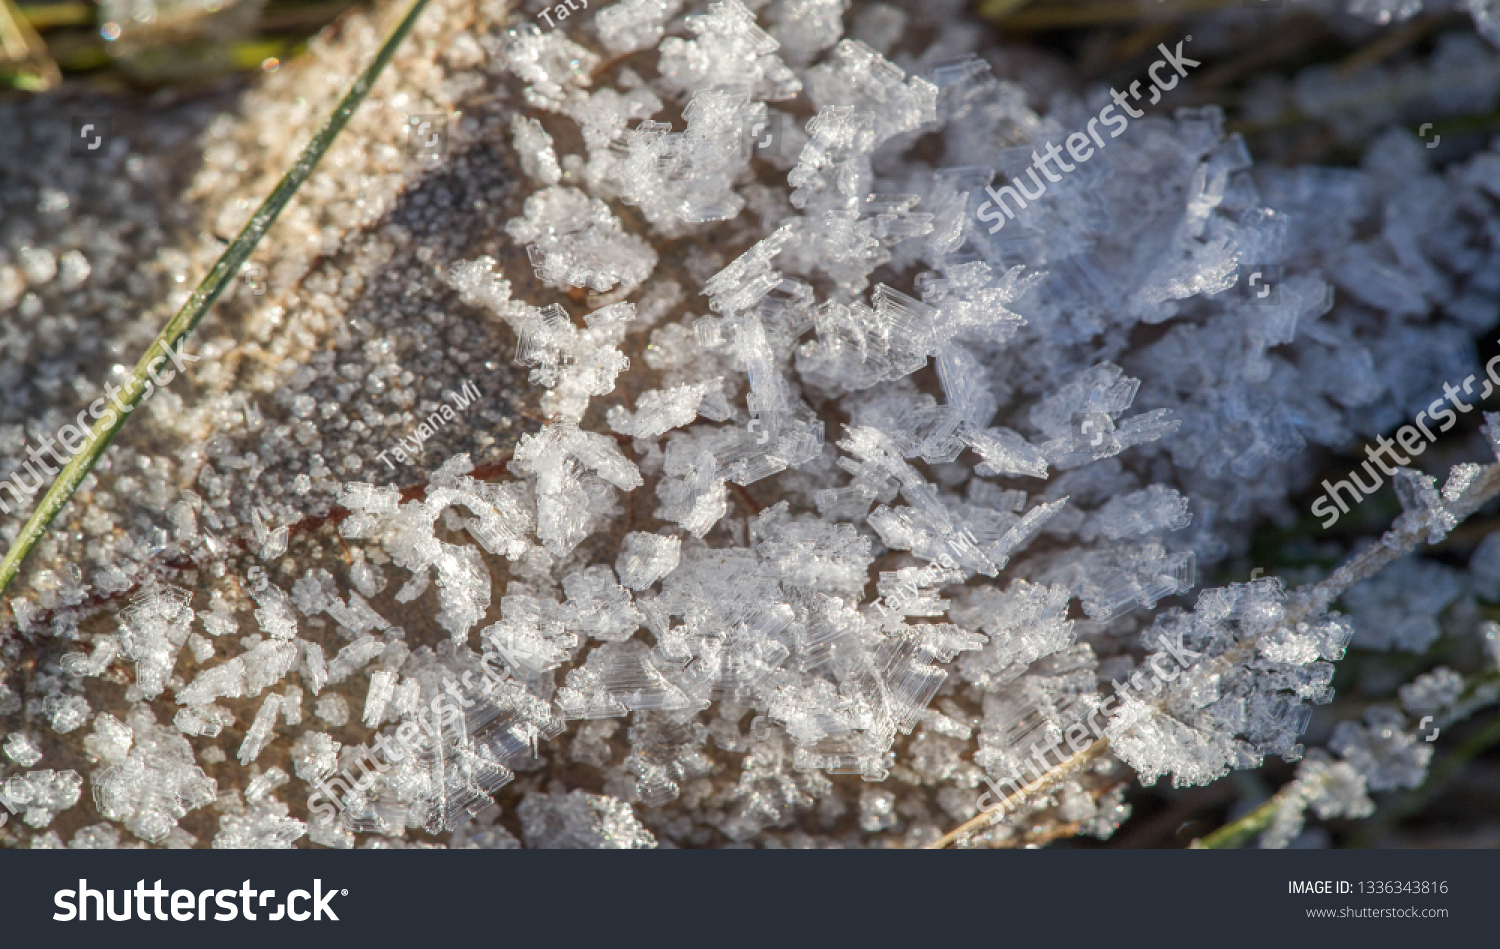 Texture background, pattern. Frost on the sprigs of grass. a deposit of small white ice crystals formed on the ground or other surfaces when the temperature falls below freezing. #1336343816